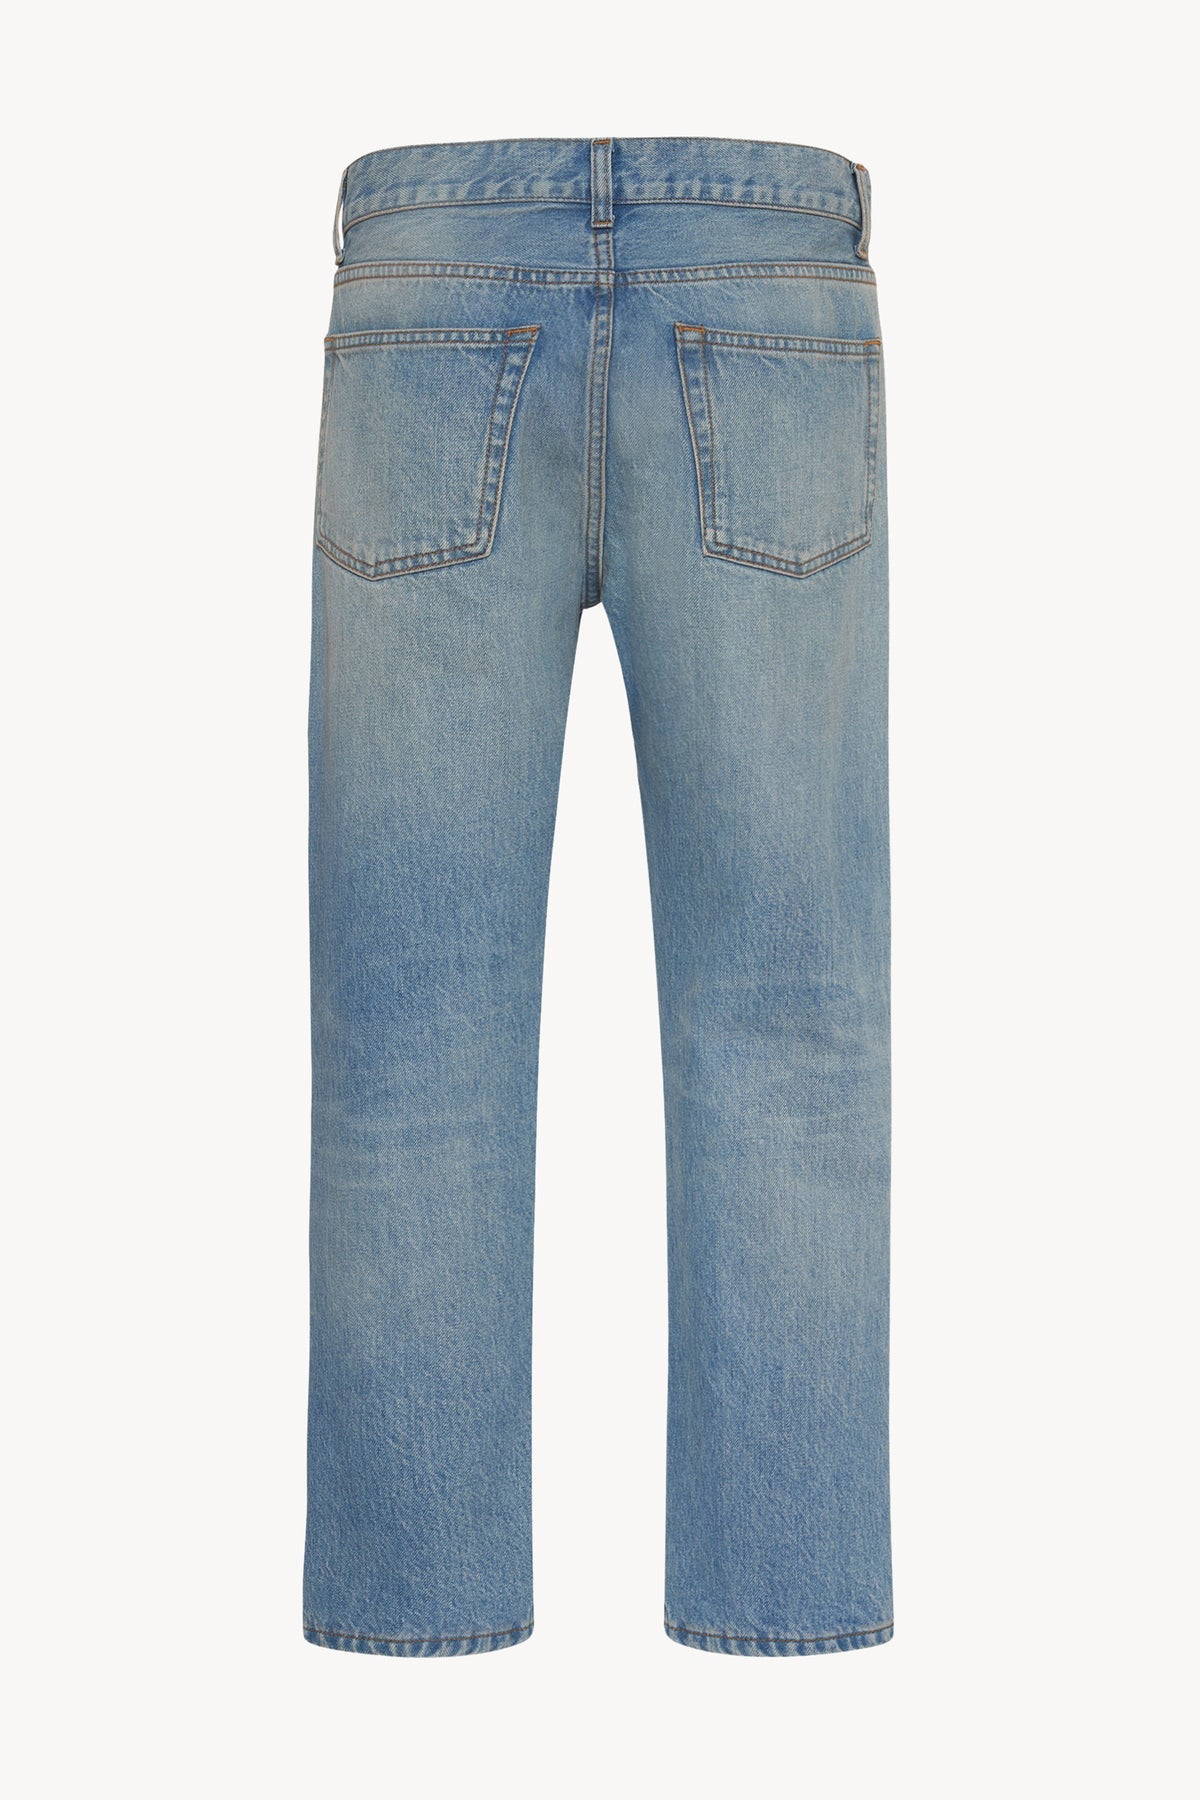 the-row-Lesley-Jeans-washed-blue-amarees